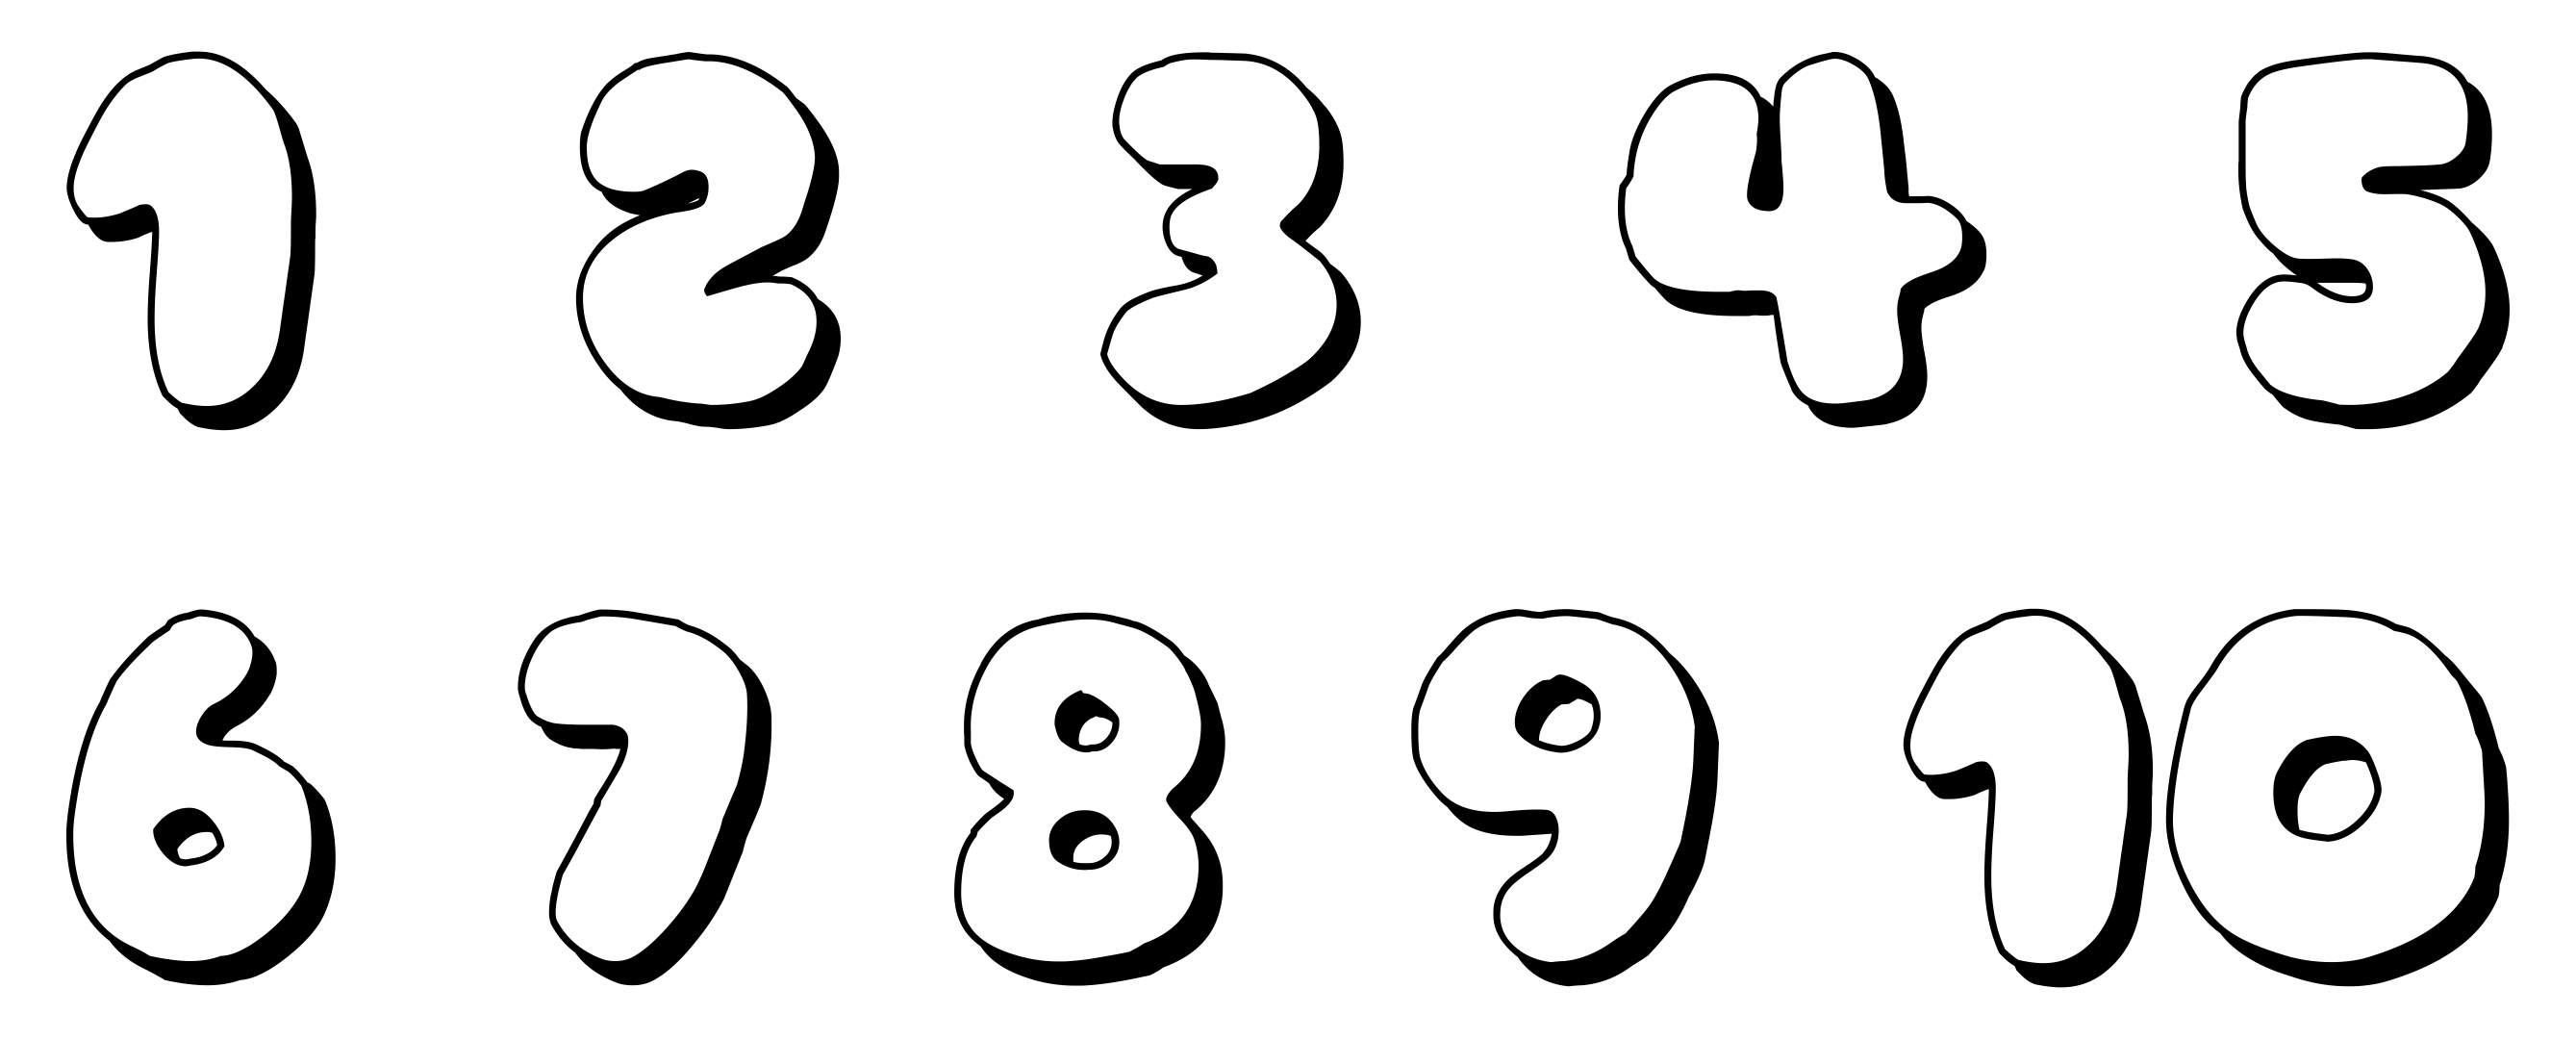 8 Best Images of Printable Bubble Numbers 1 10 Free Printable